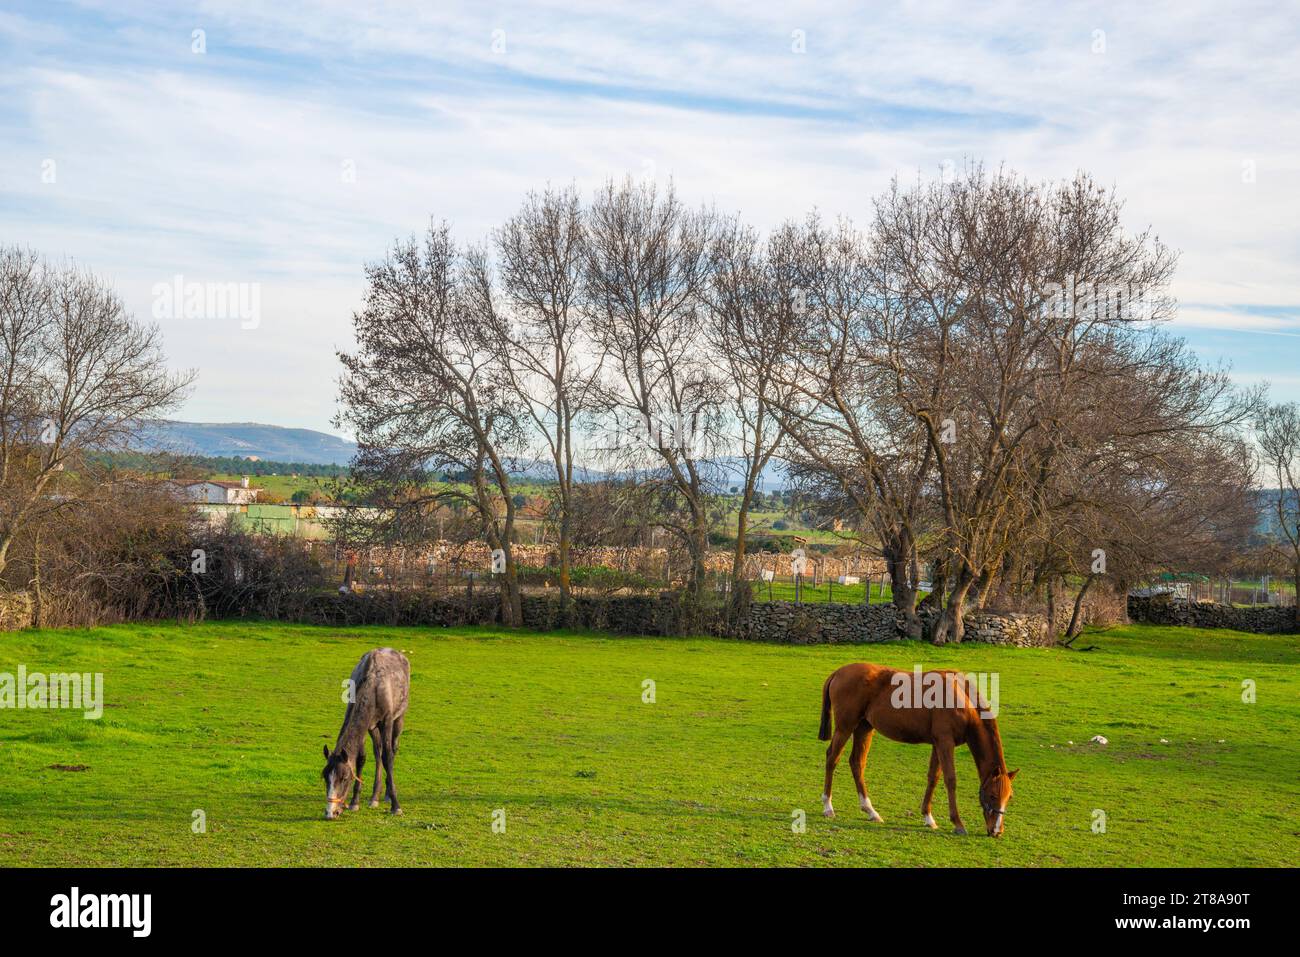 Two horses in a meadow. Gandullas, Madrid province, Spain. Stock Photo